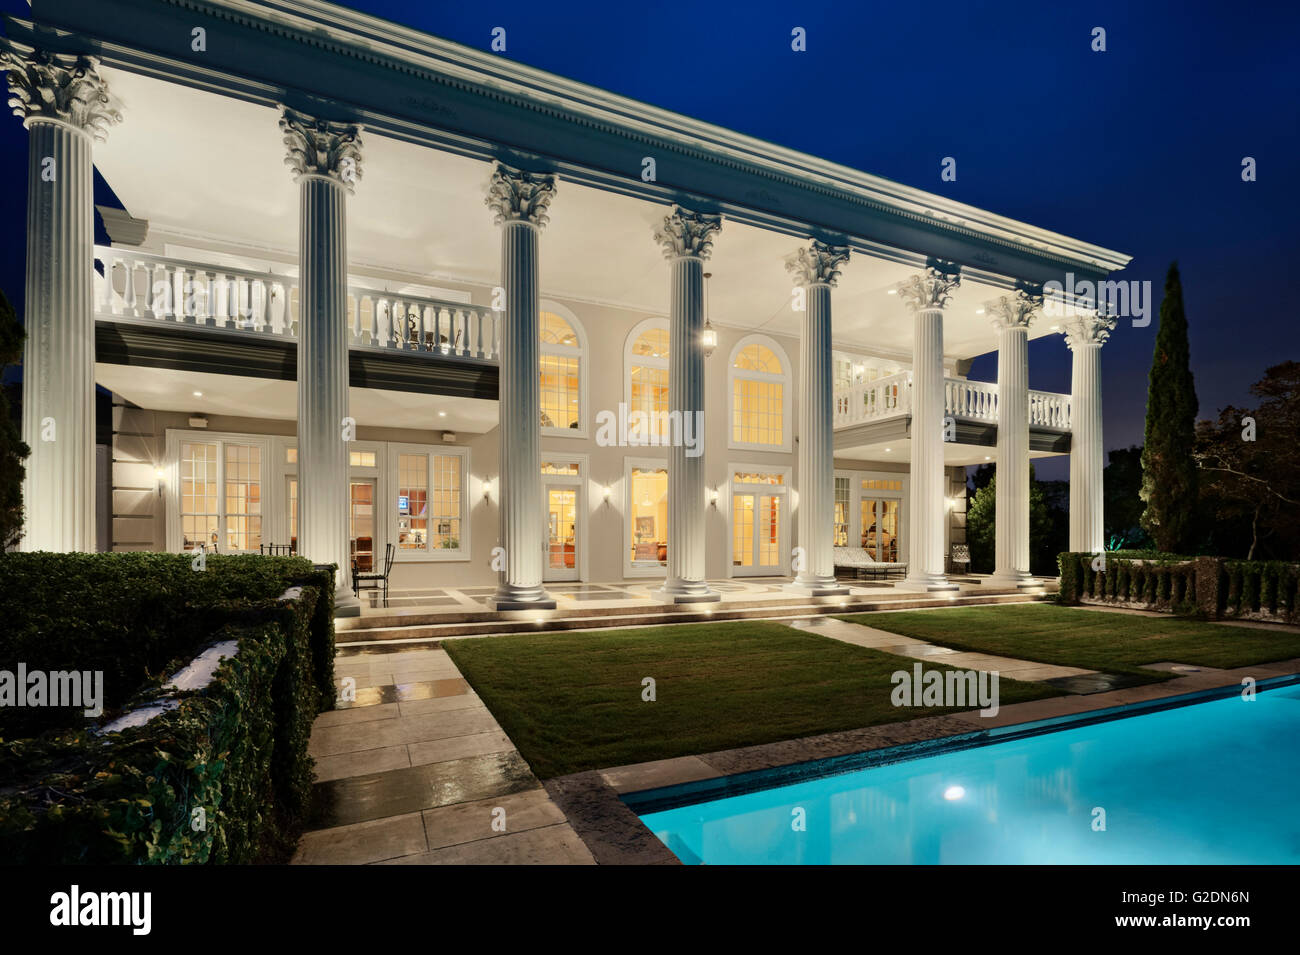 Mansion with Columns and Swimming Pool at Night Stock Photo